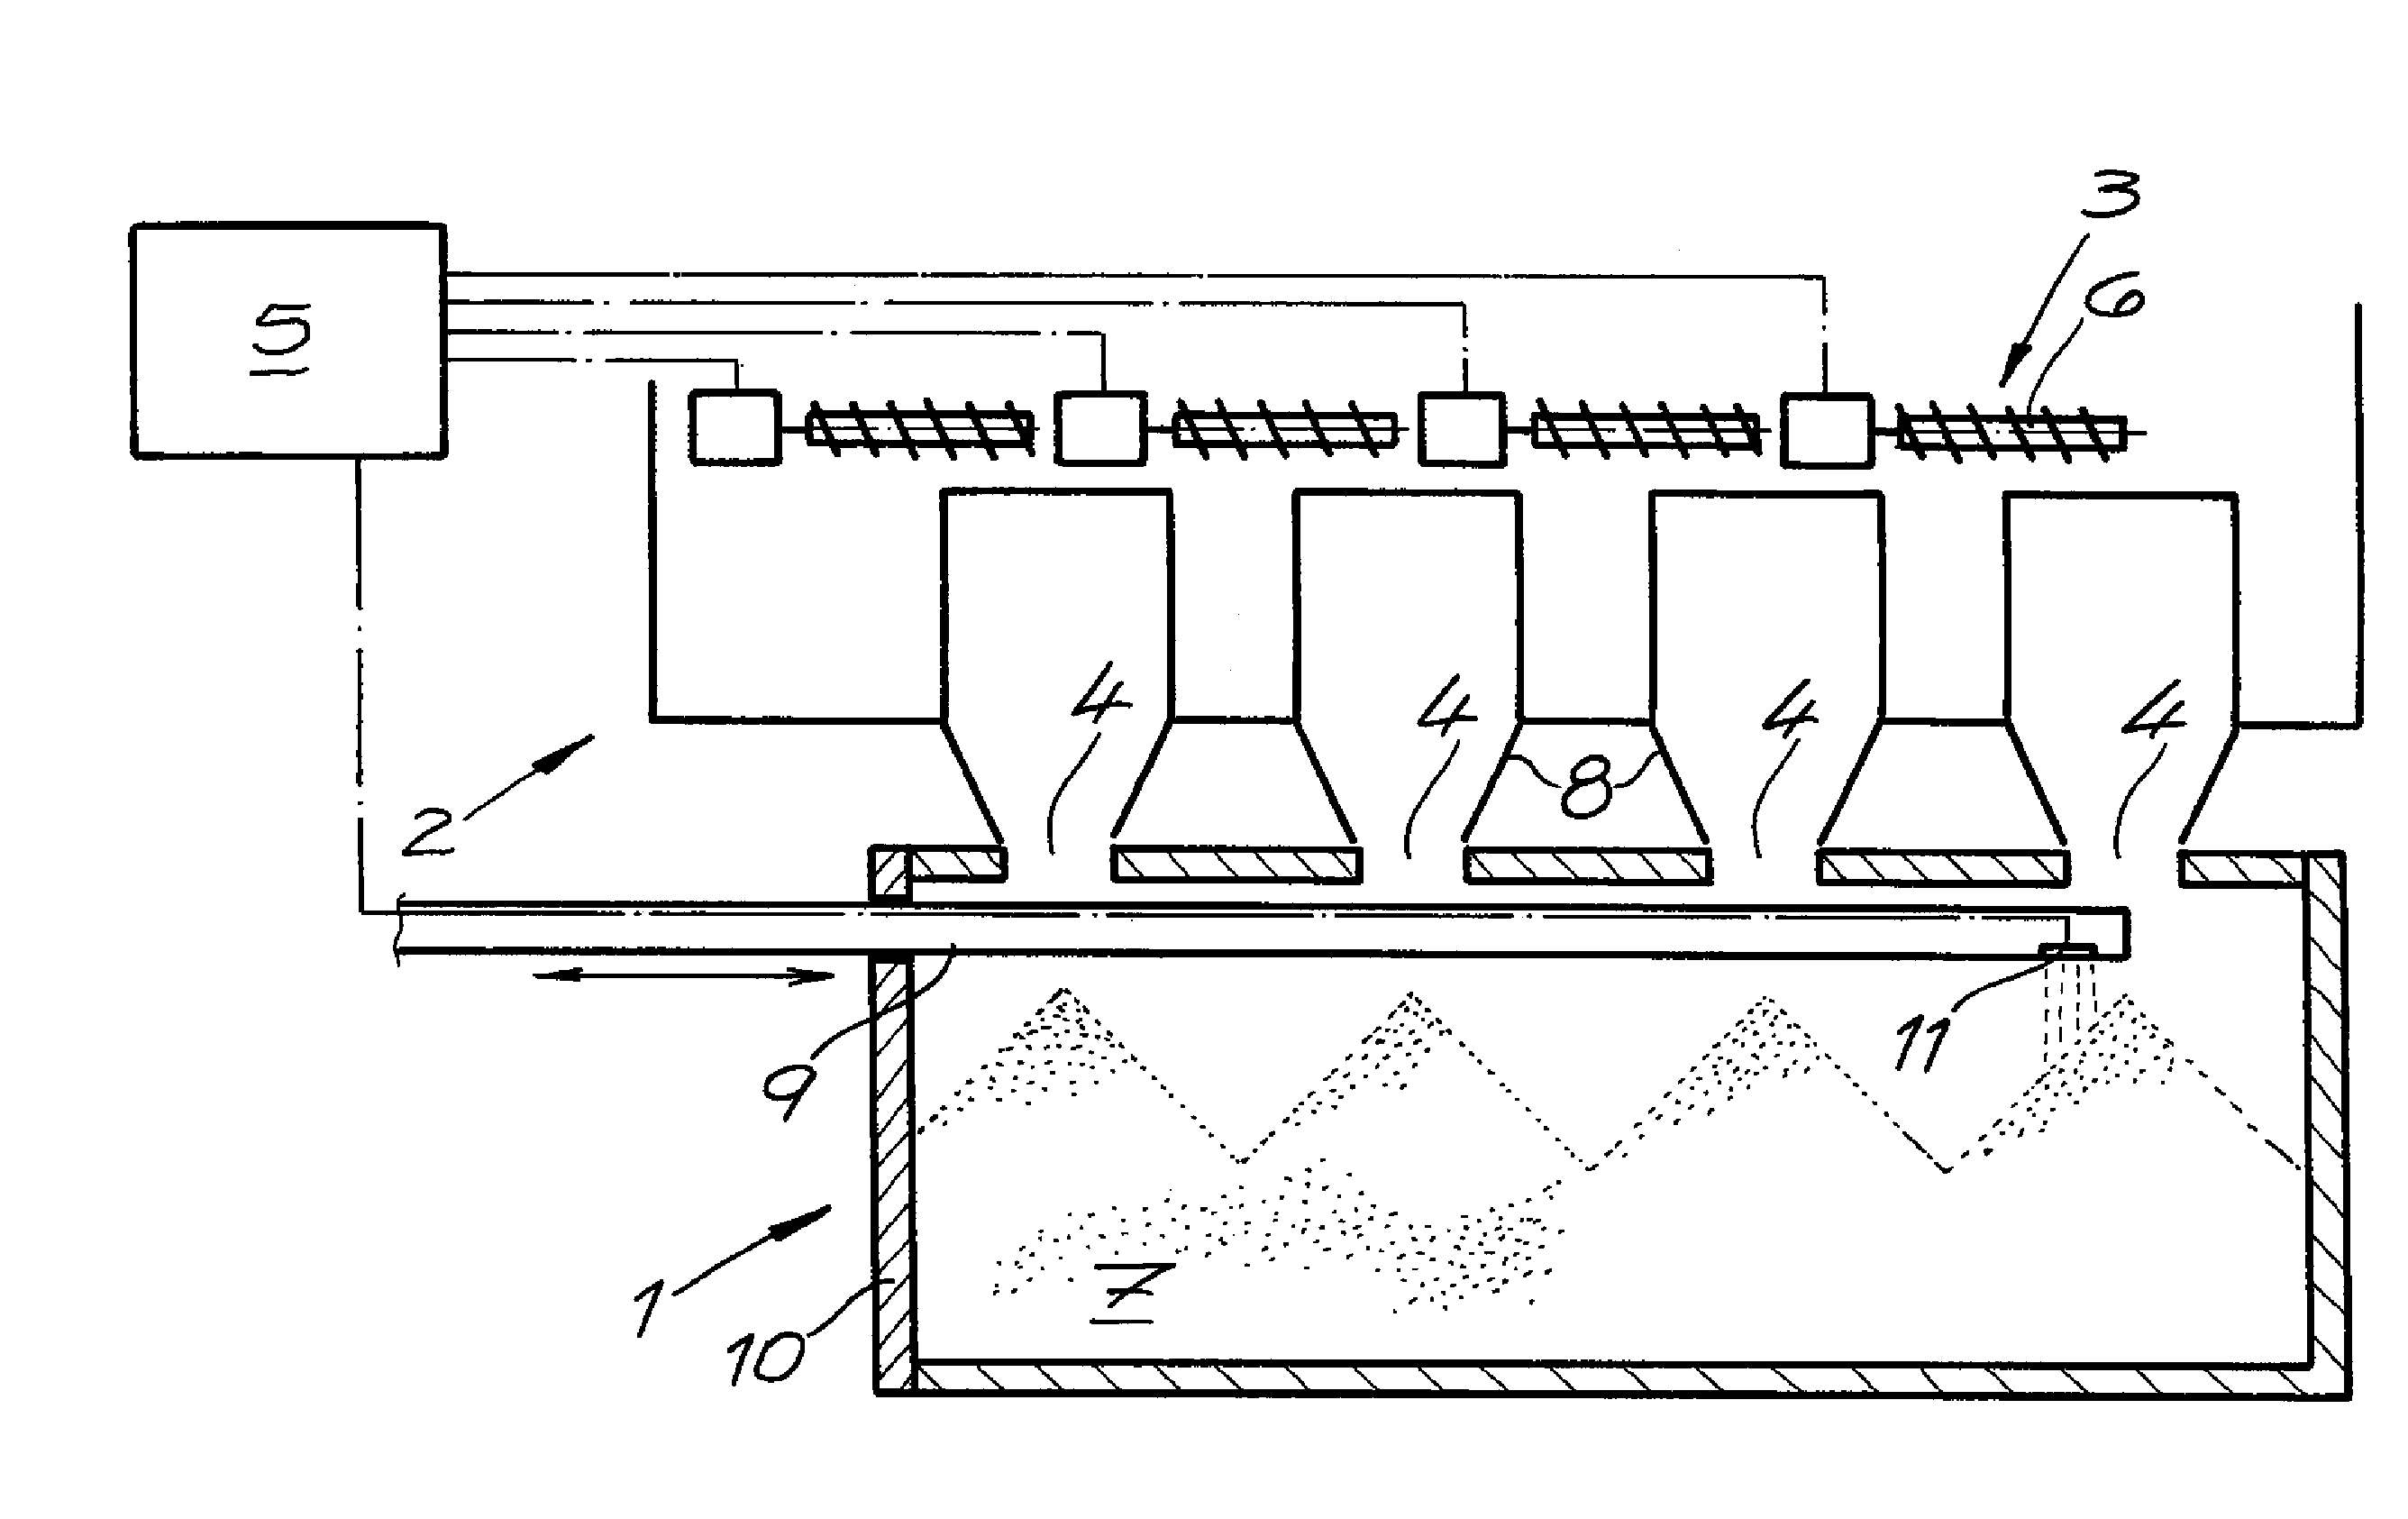 Leveling apparatus for and method of filling an oven chamber of a coke-oven battery